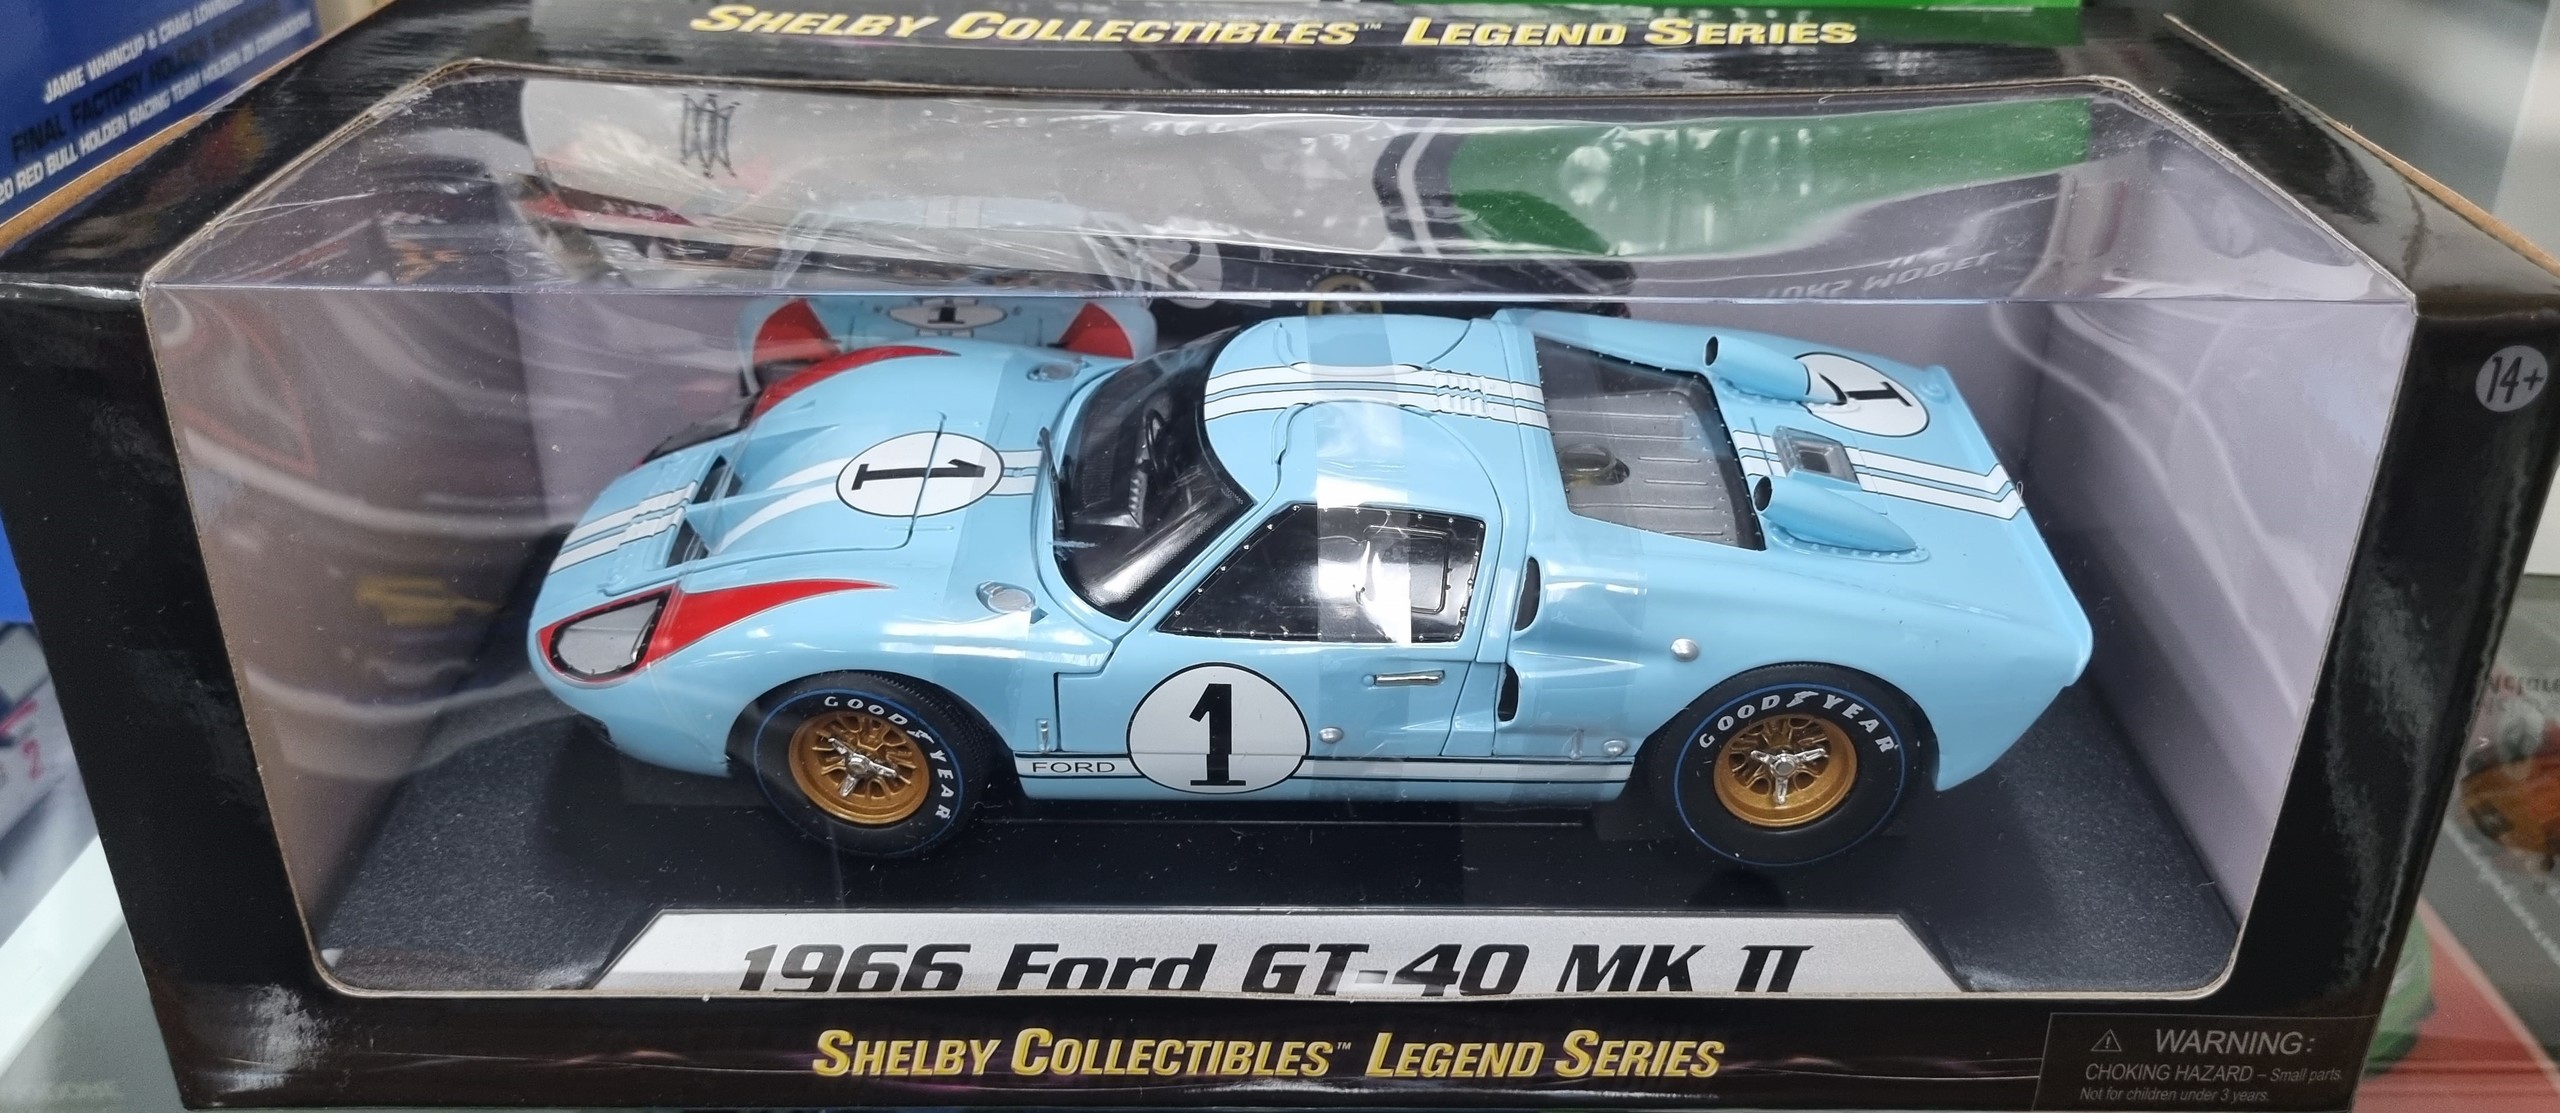 Ford GT40 MKII 1966 Le Mans 2nd Denny Hulme & Ken Miles 1/18 Shelby Collectibles